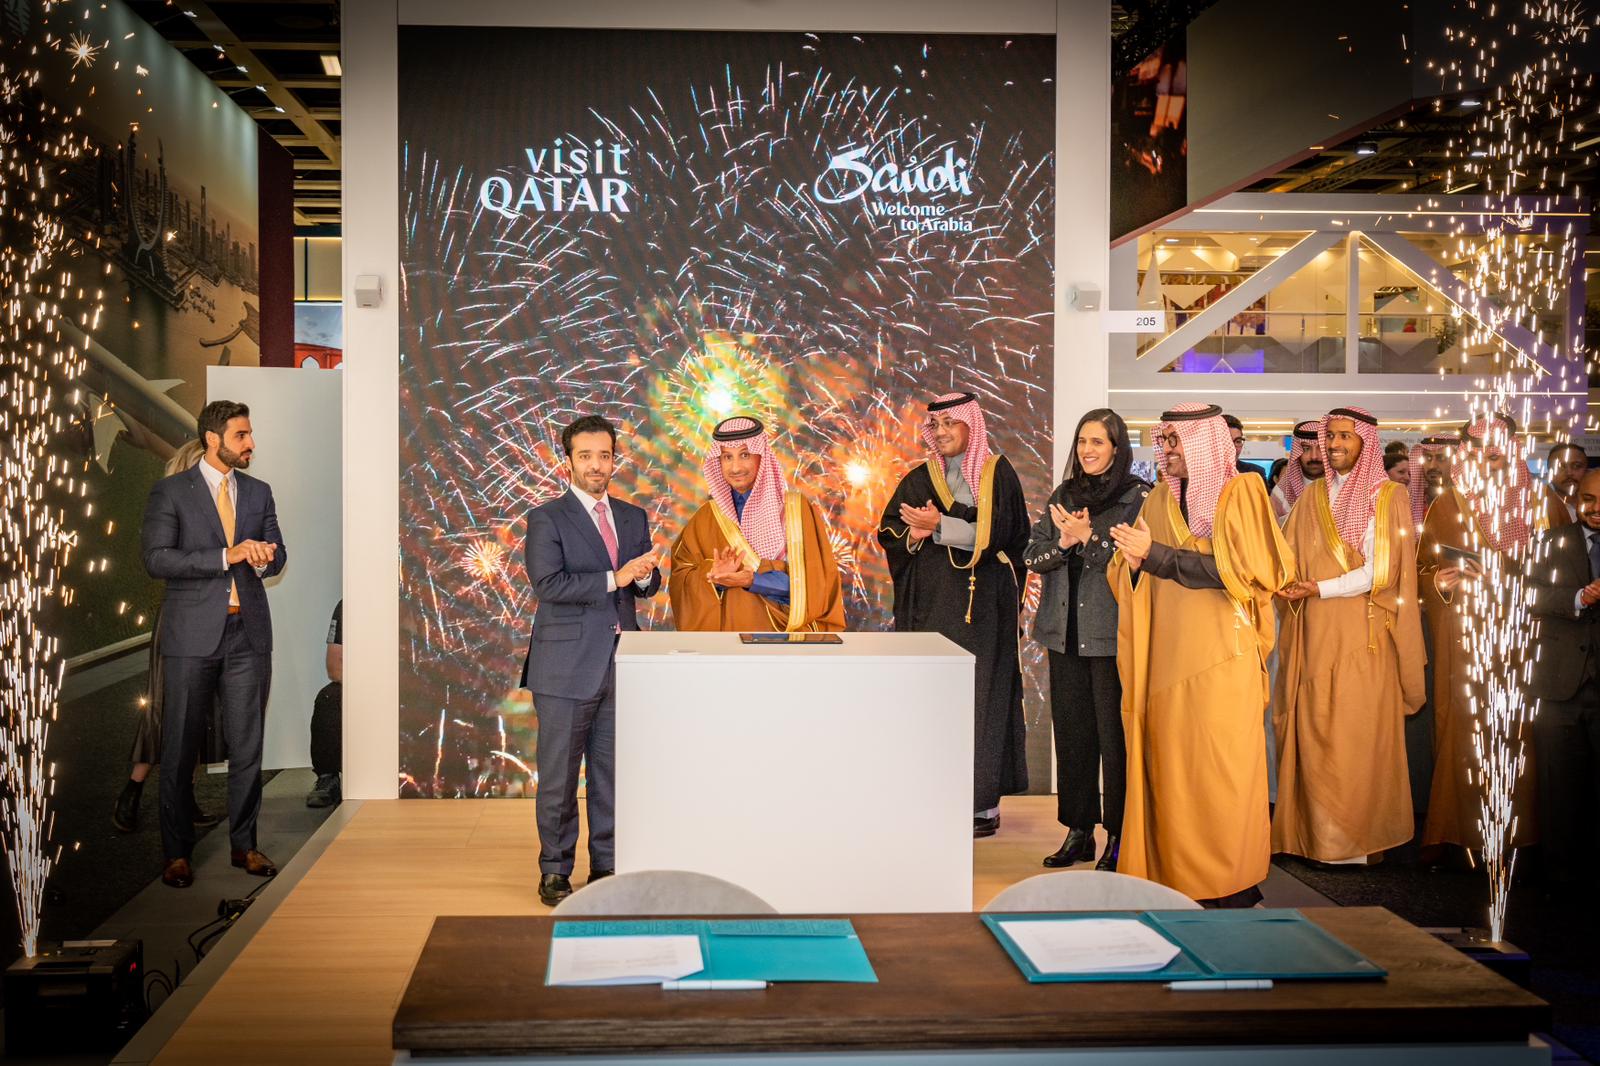 ‘Double the Discovery’ campaign launched between Qatar Tourism, Saudi Tourism Authority & Discover Saudi